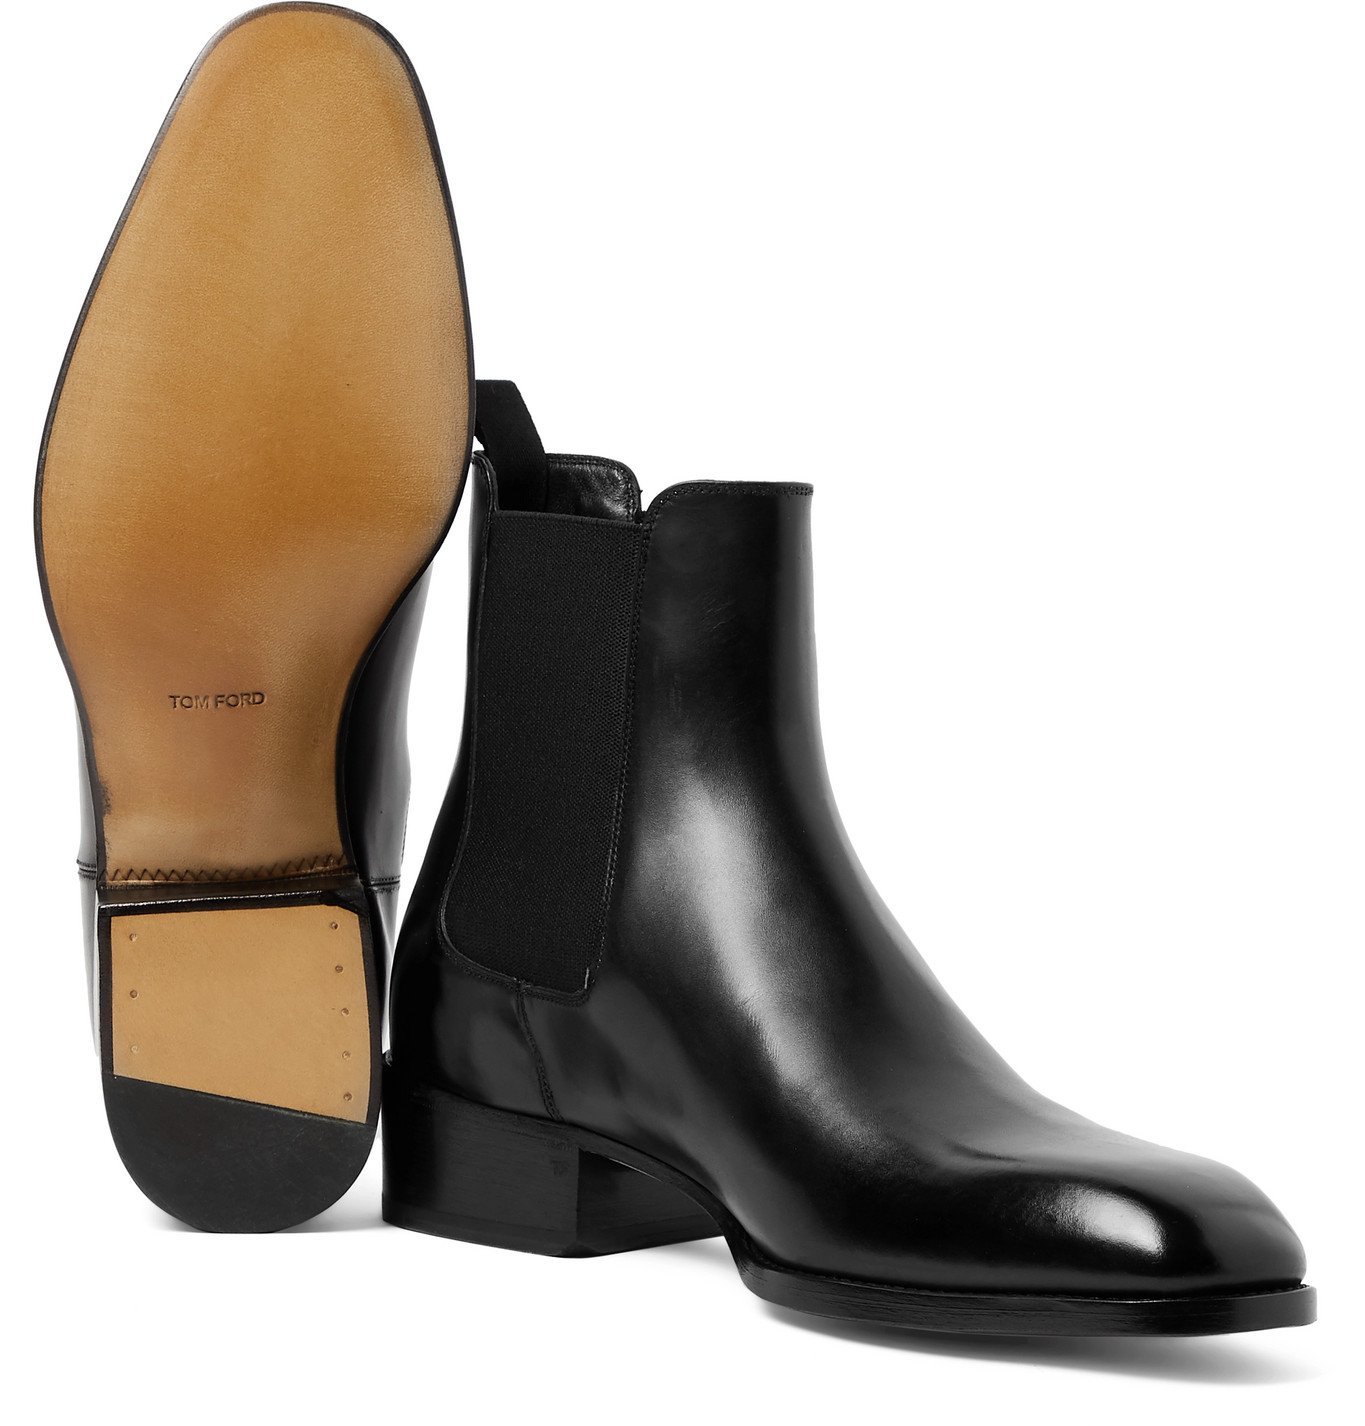 TOM FORD - Hainaut Polished-Leather Chelsea Boots - Black TOM FORD